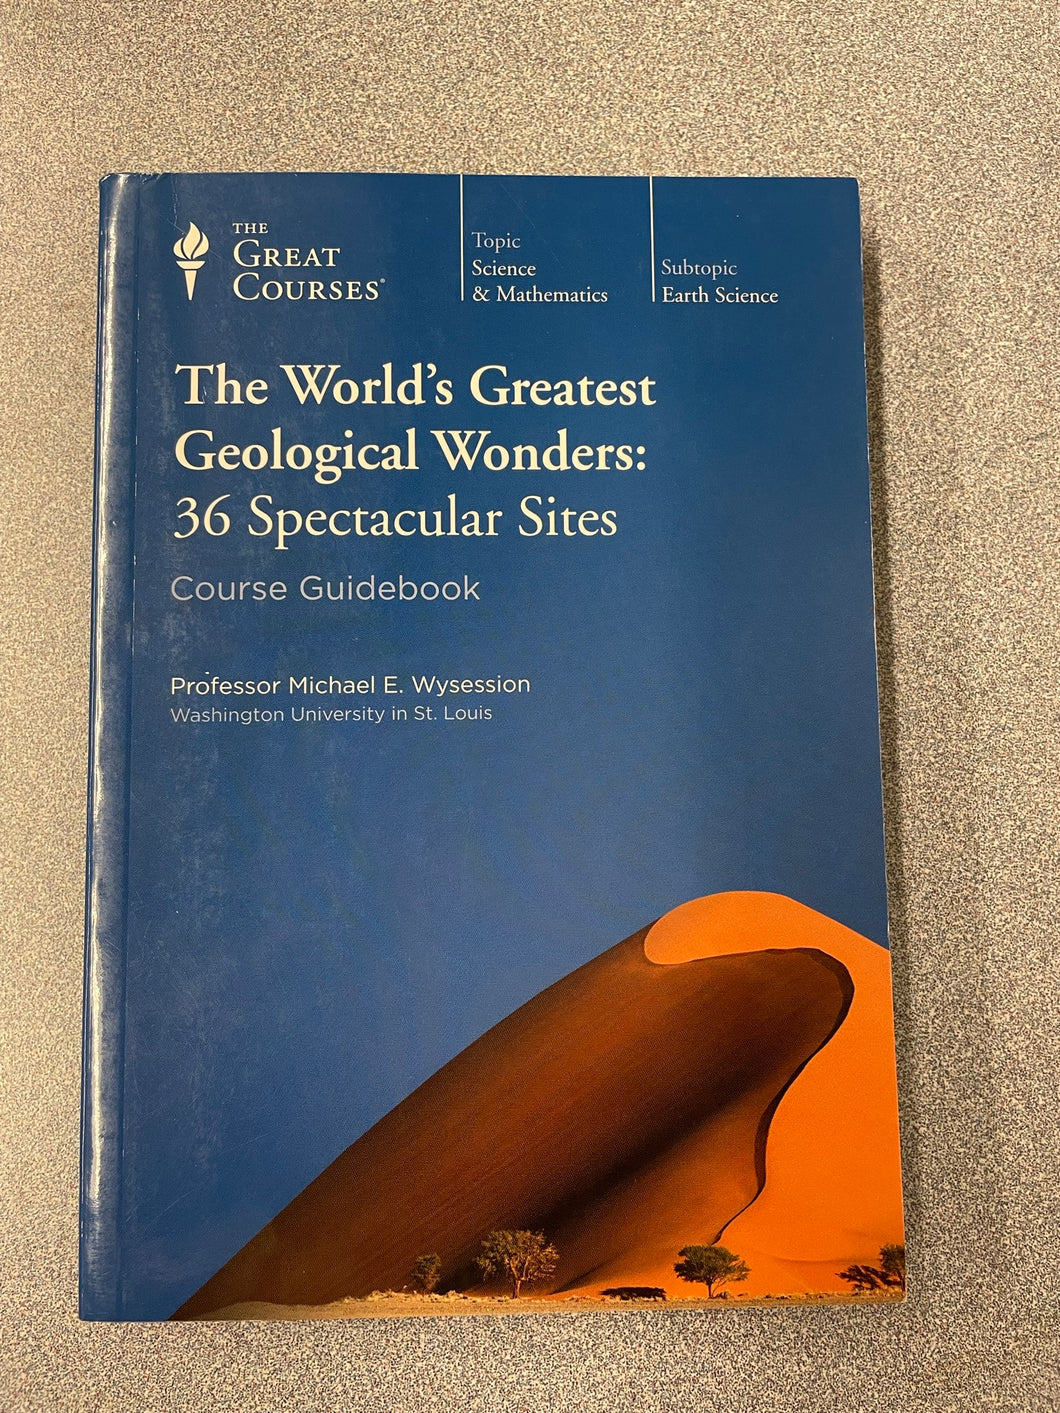 The World's Greatest Geological Wonders: 36 Spectacular Sites Course Guidebook, Wysession, Michael E. [2013] GC 12/22